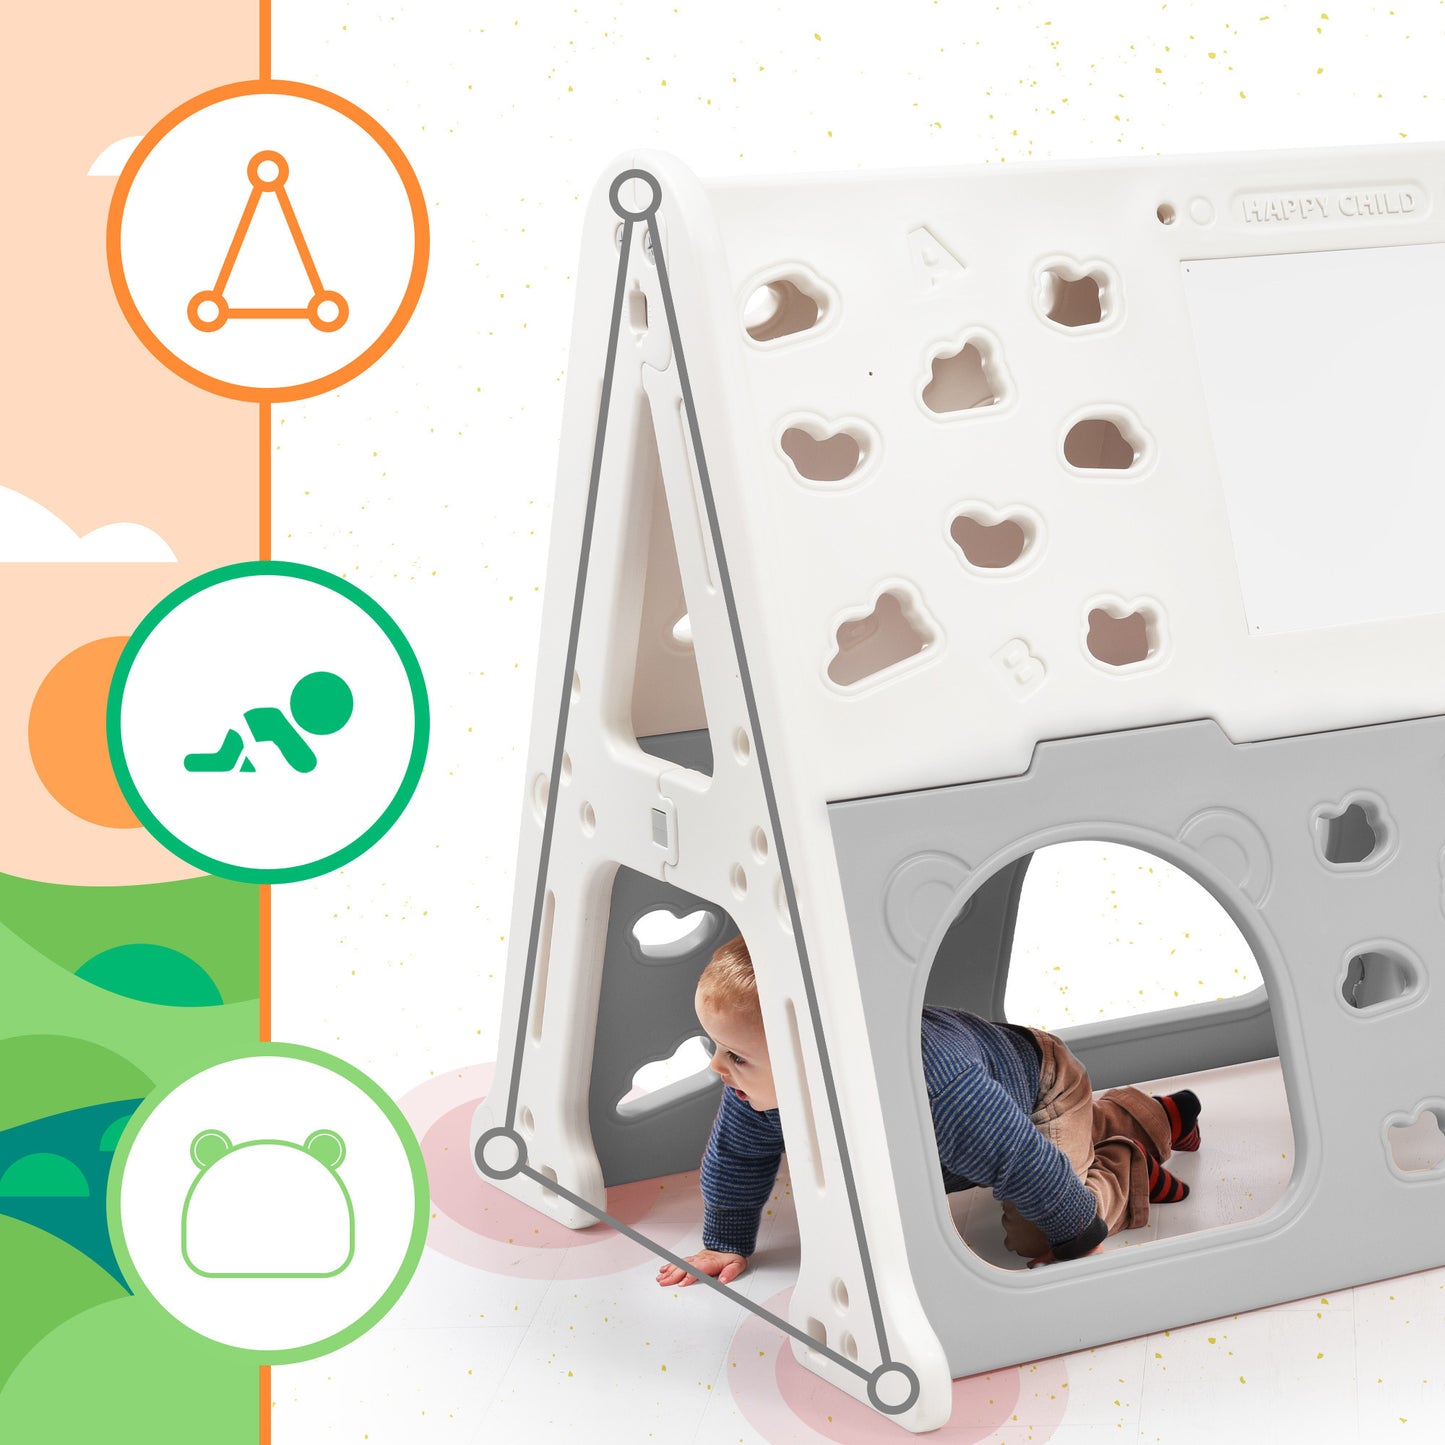 5-in-1 Toddler Climber Basketball Hoop Set Kids Playground Climber Playset with Tunnel, Climber, Whiteboard,Toy Building Block Baseplates, Combination for Babies